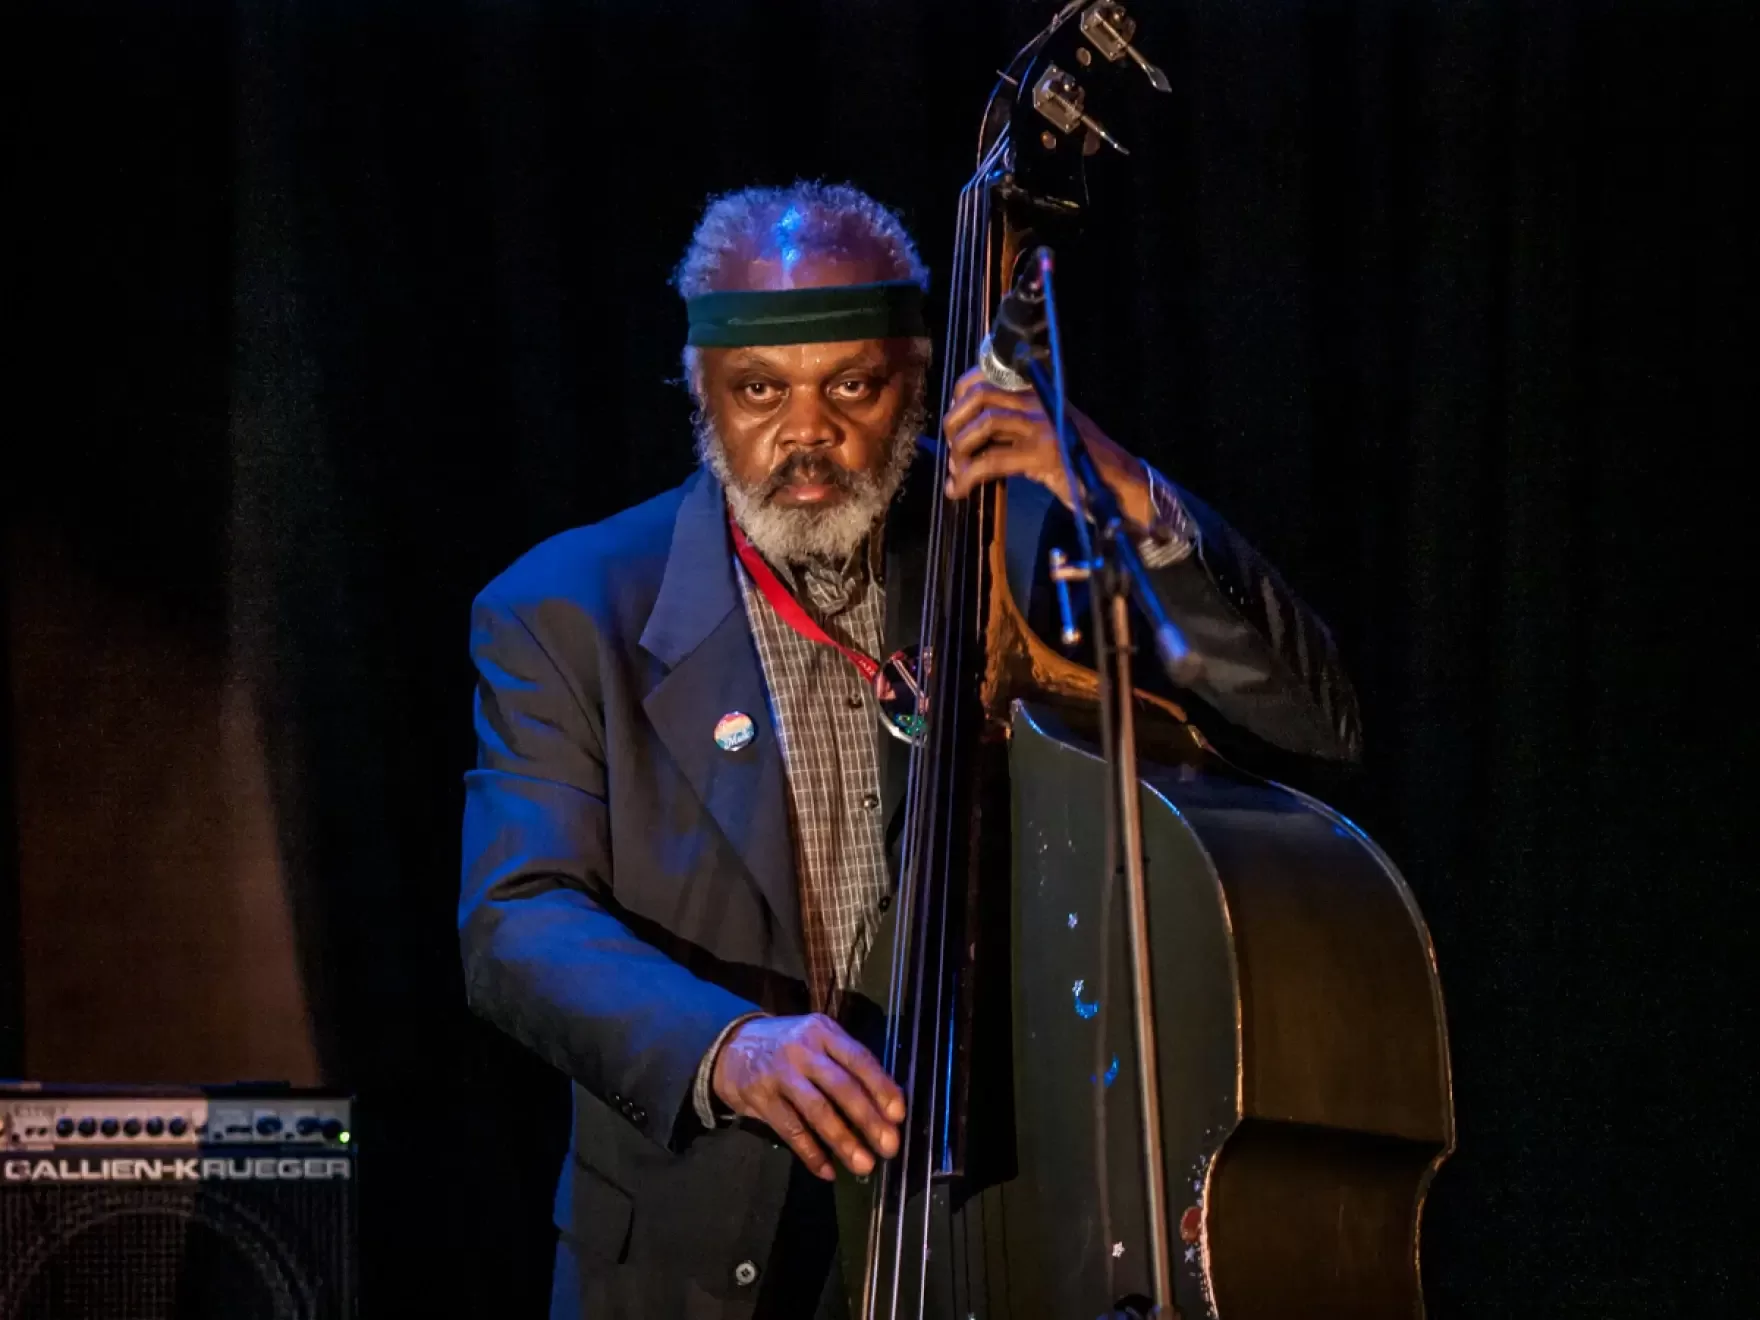 The Remarkable story of jazz bassists Henry Grimes 2